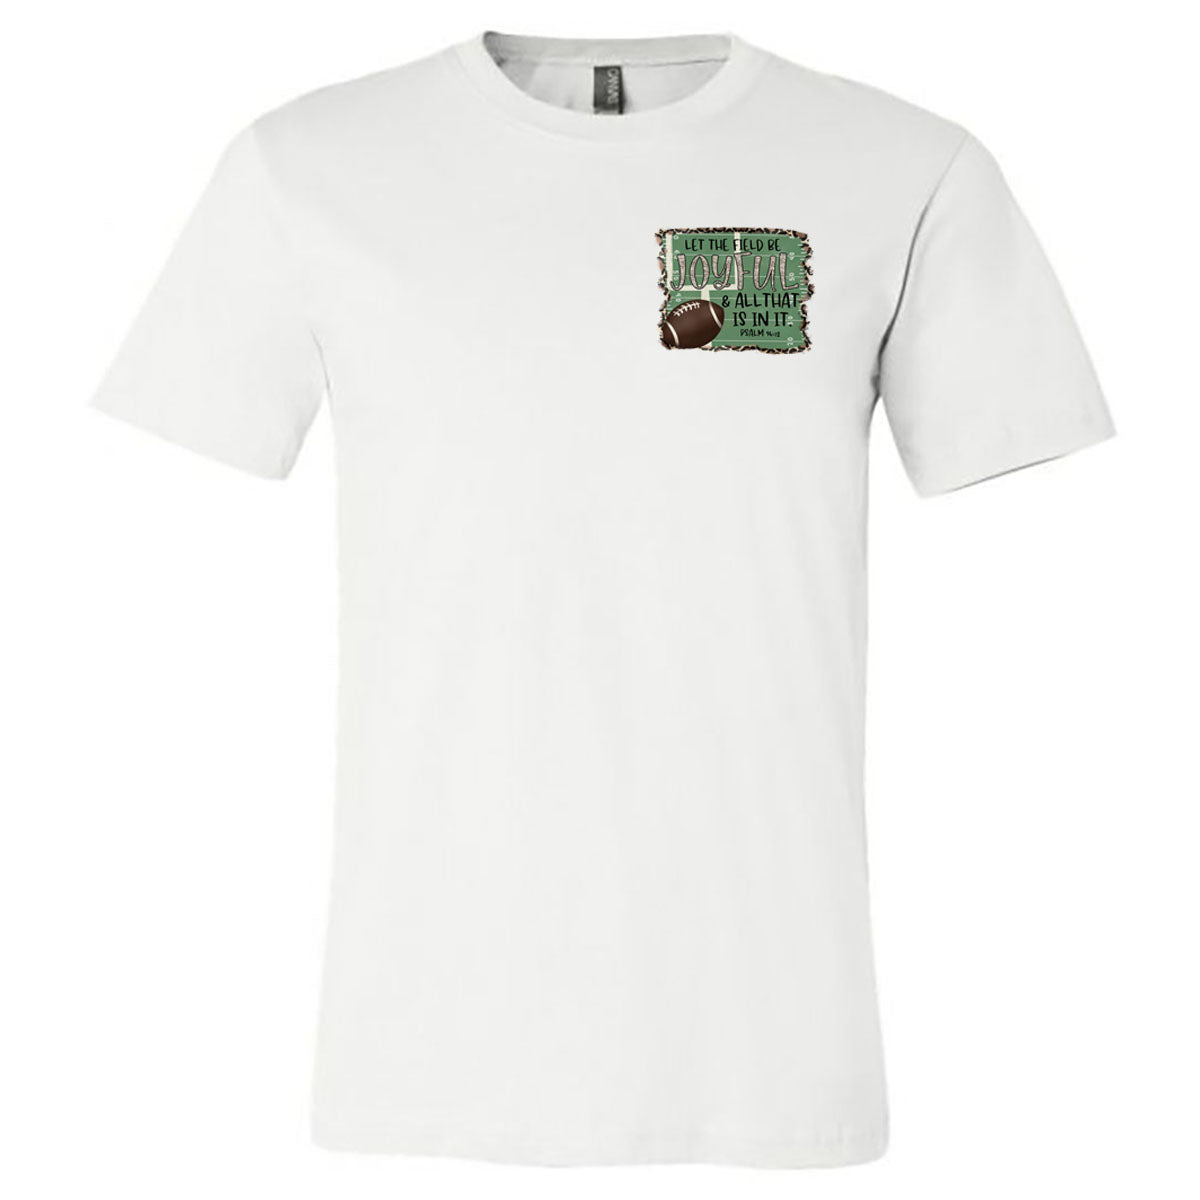 Football - Let The Field Be Joyful - White Short/Long Sleeves Tee - Southern Grace Creations